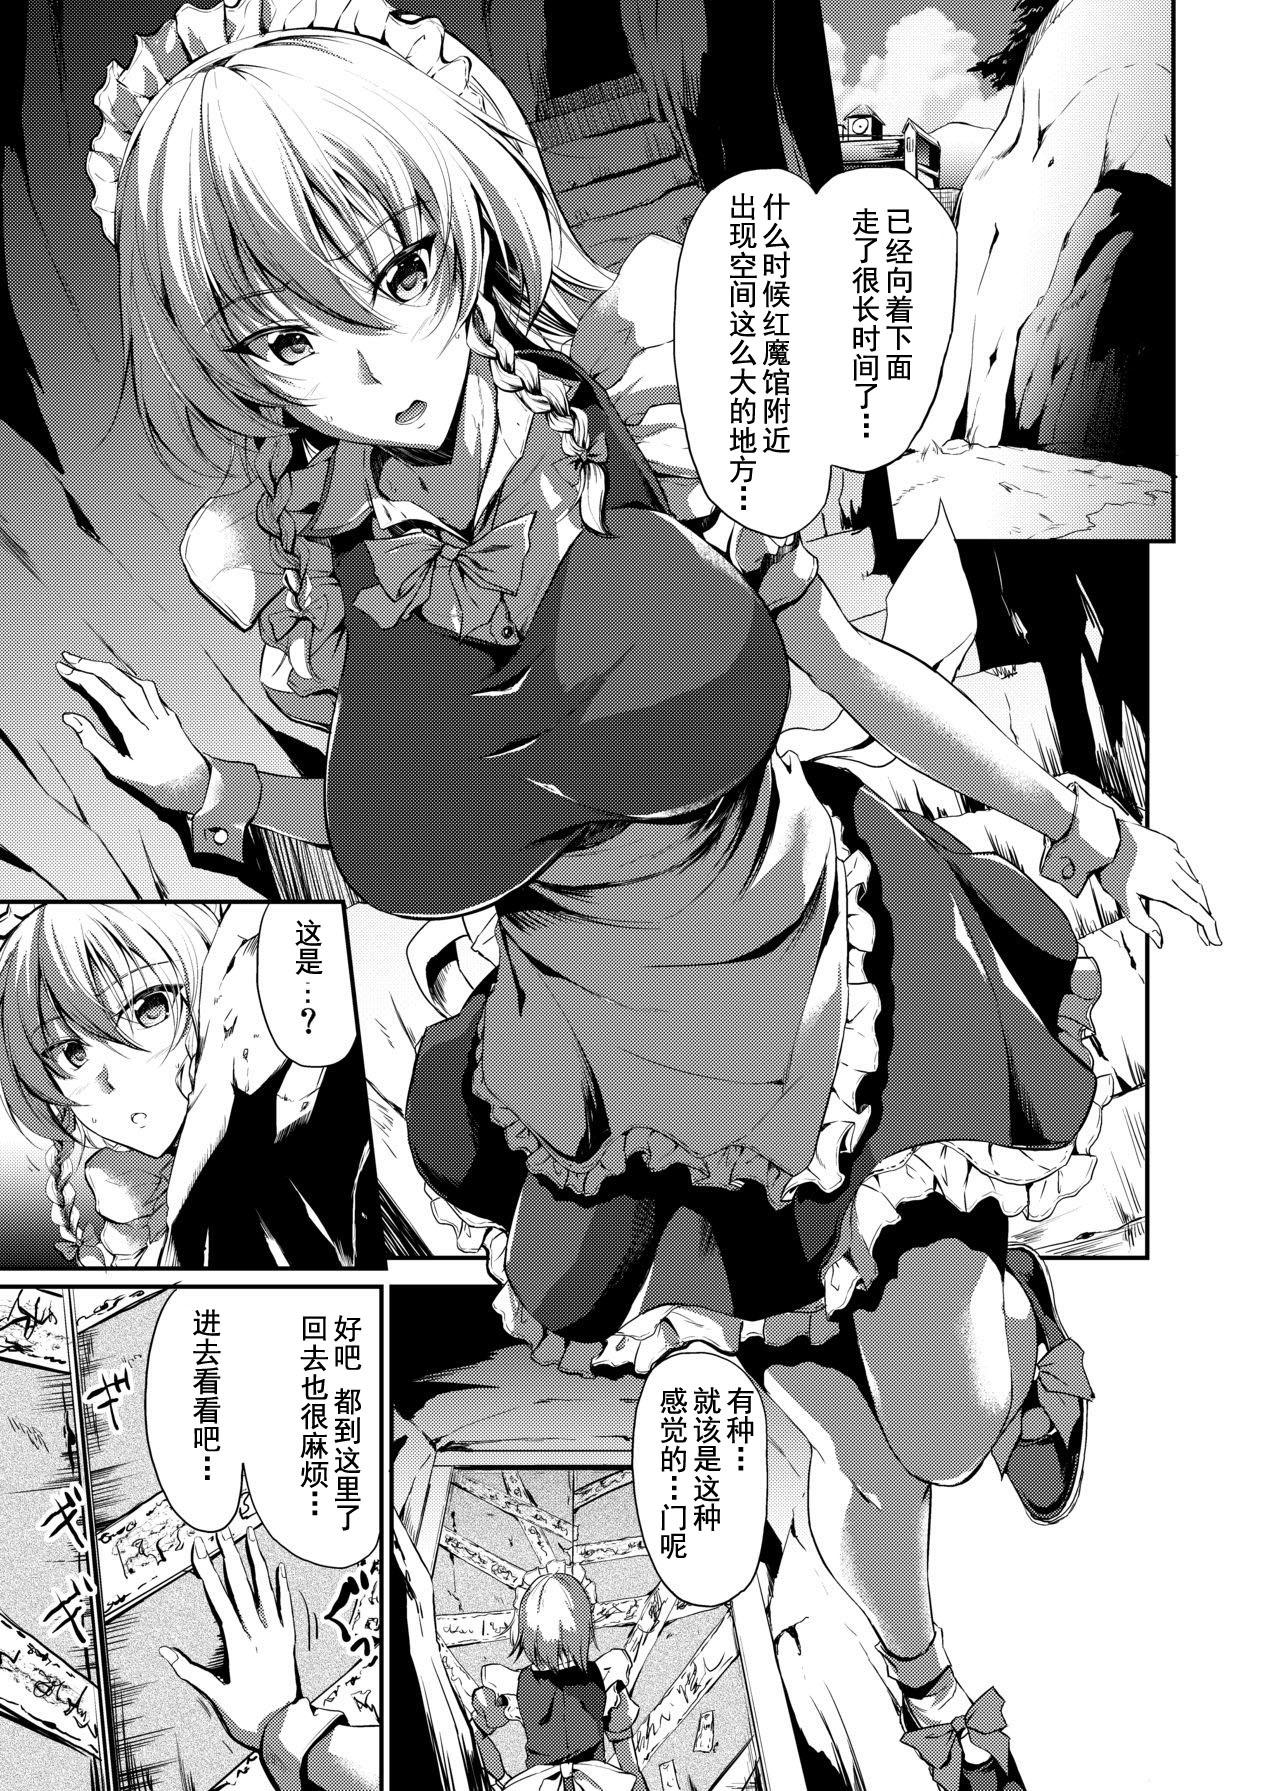 Porno 18 Ero Trap Dungeon: HELL - Touhou project Crazy - Page 3